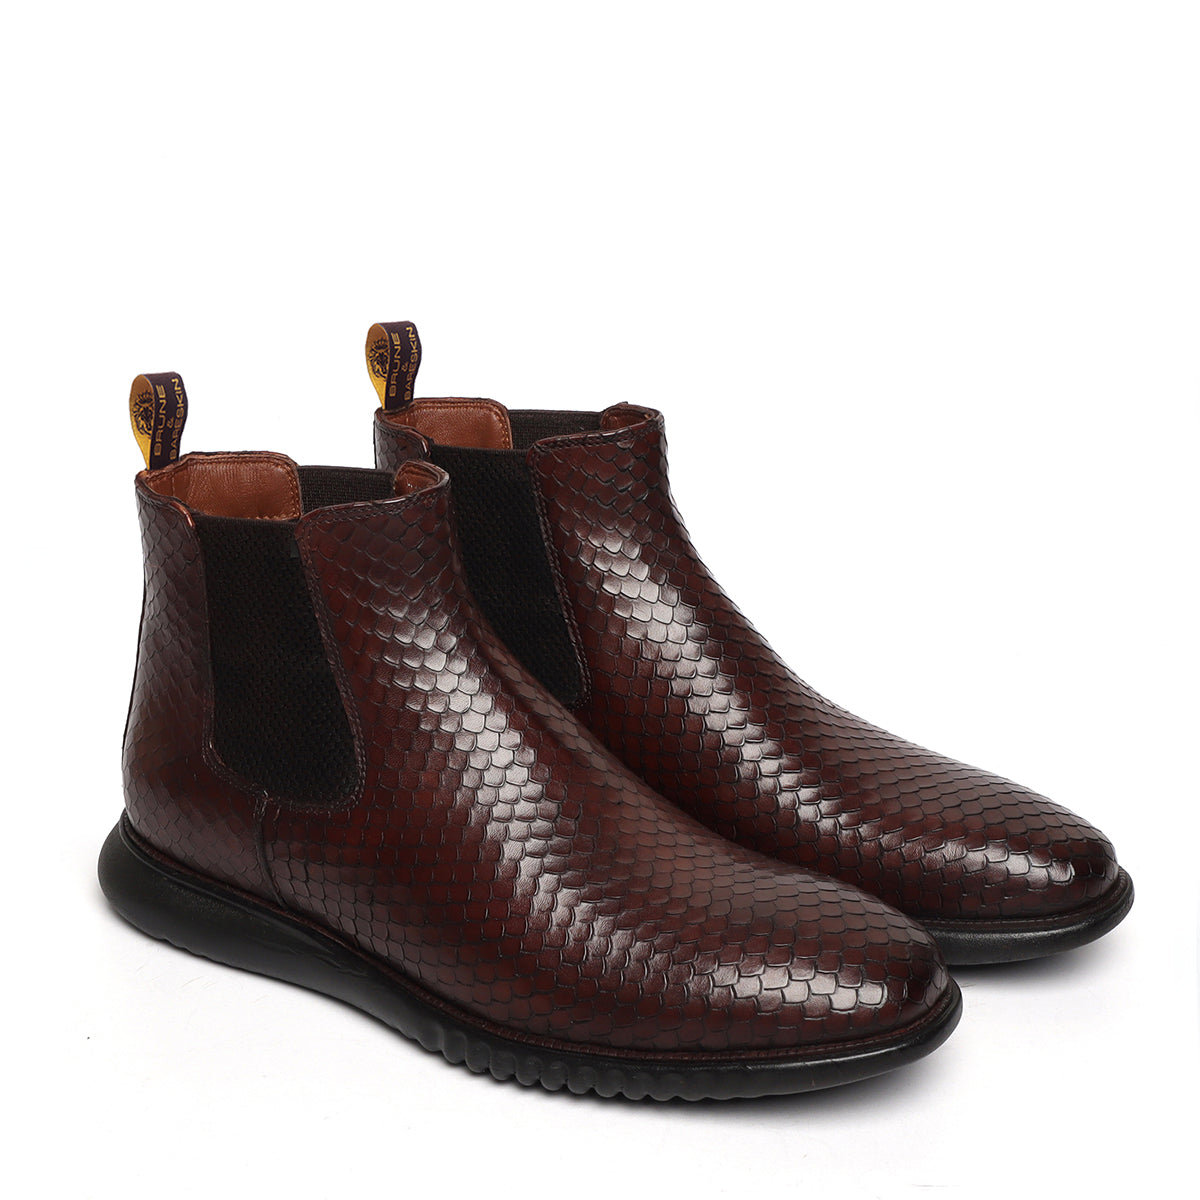 Dark Brown Chelsea Boot with Hand scaling Snake Skin Textured Leather Light weight sole